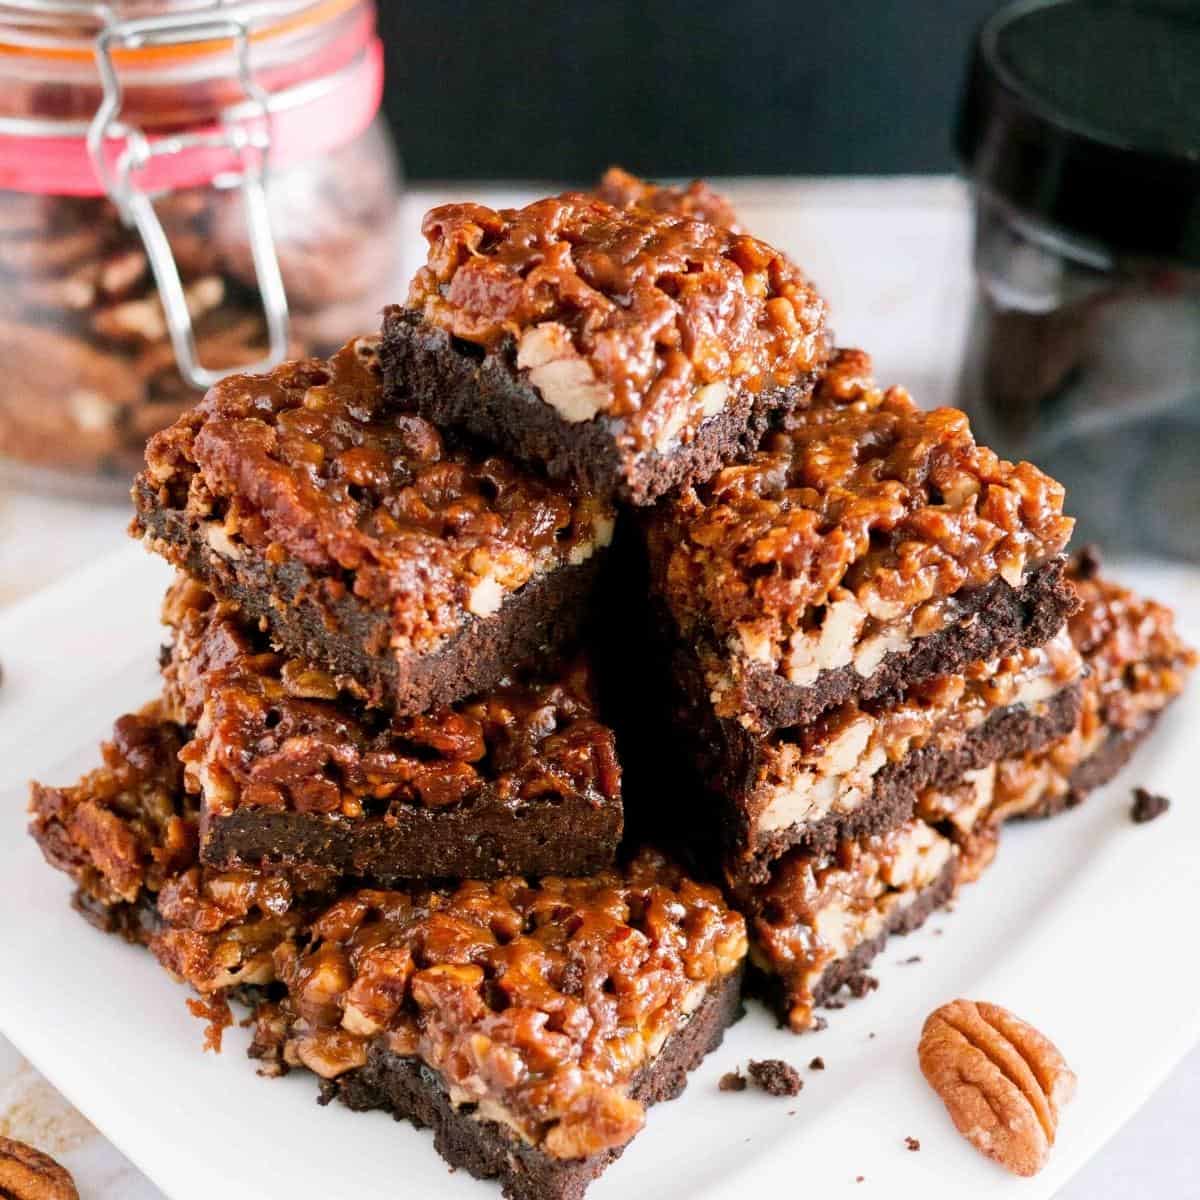 A stack of chocolate squares